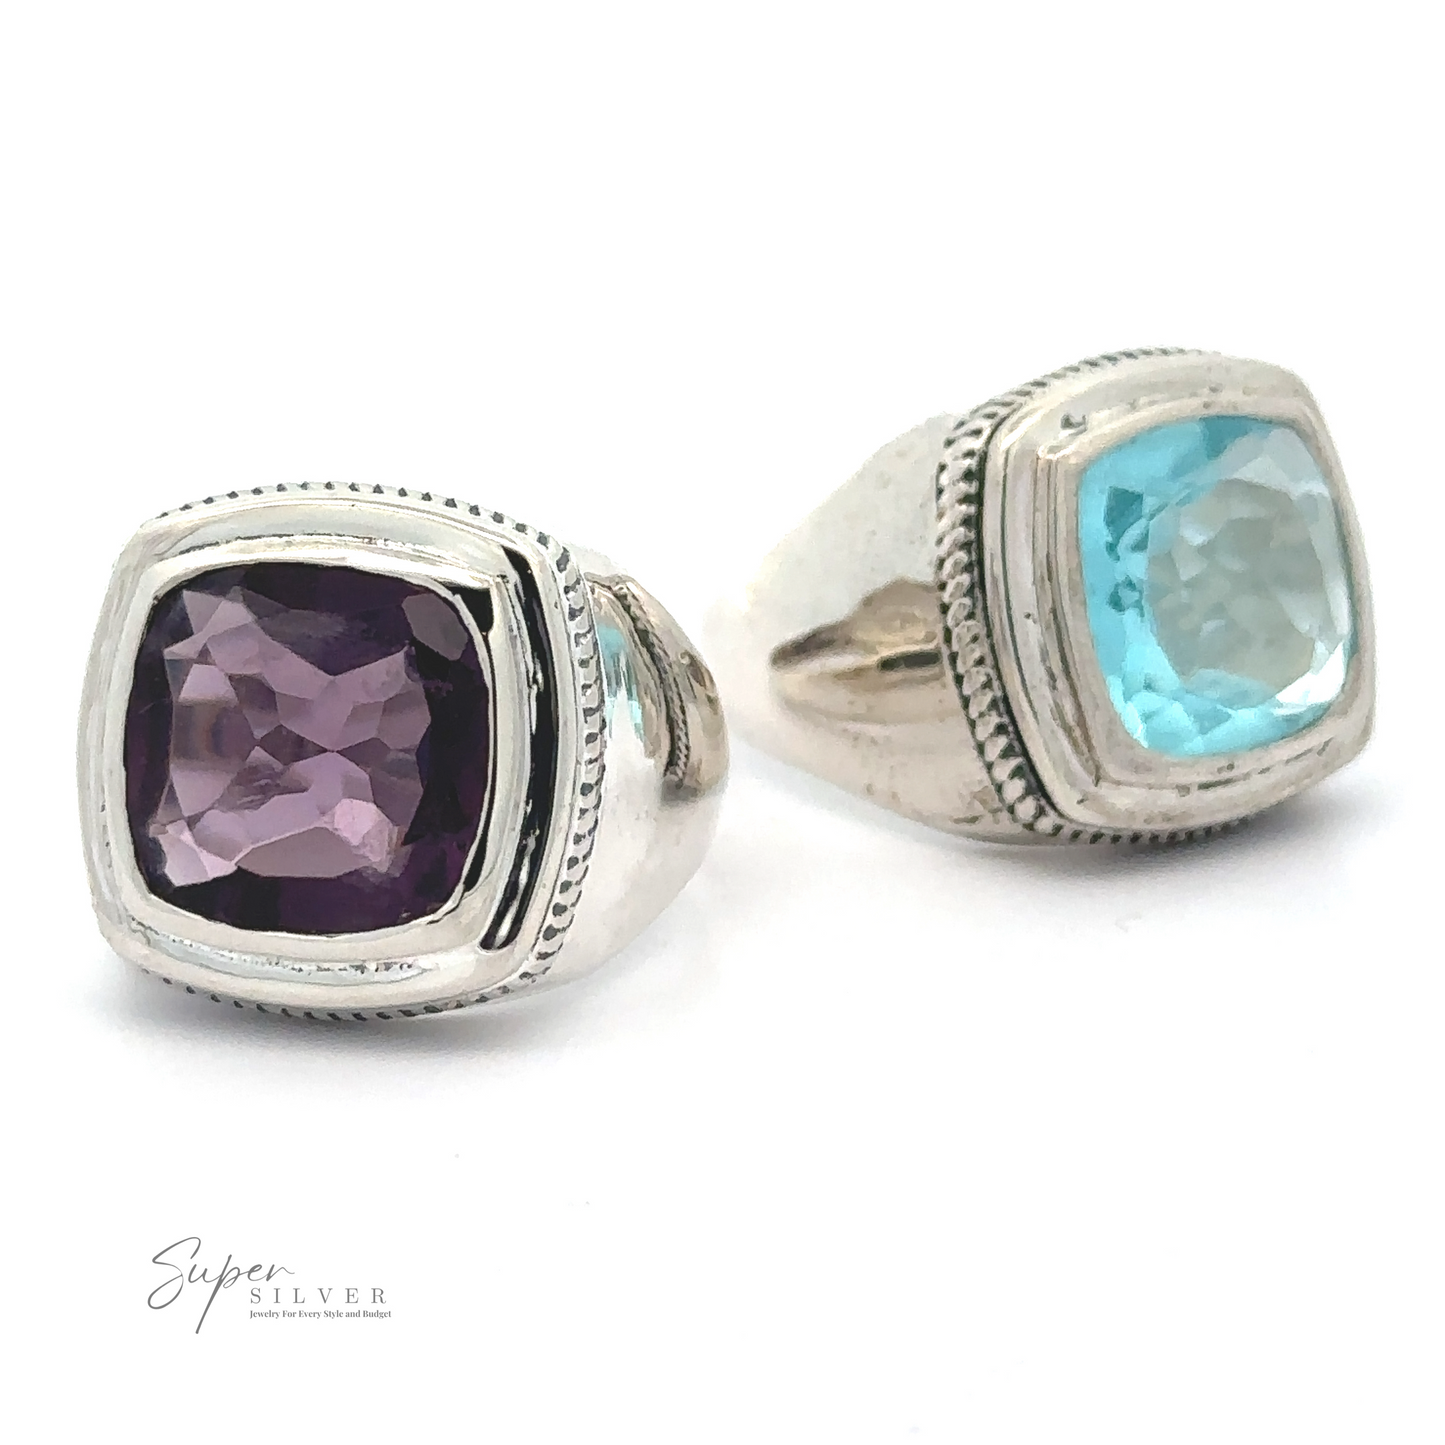 Two Faceted Stone Signet Rings with square-cut gemstones, one amethyst and one blue topaz, are displayed on a white surface. The logo "Super Silver" is visible in the bottom left corner.